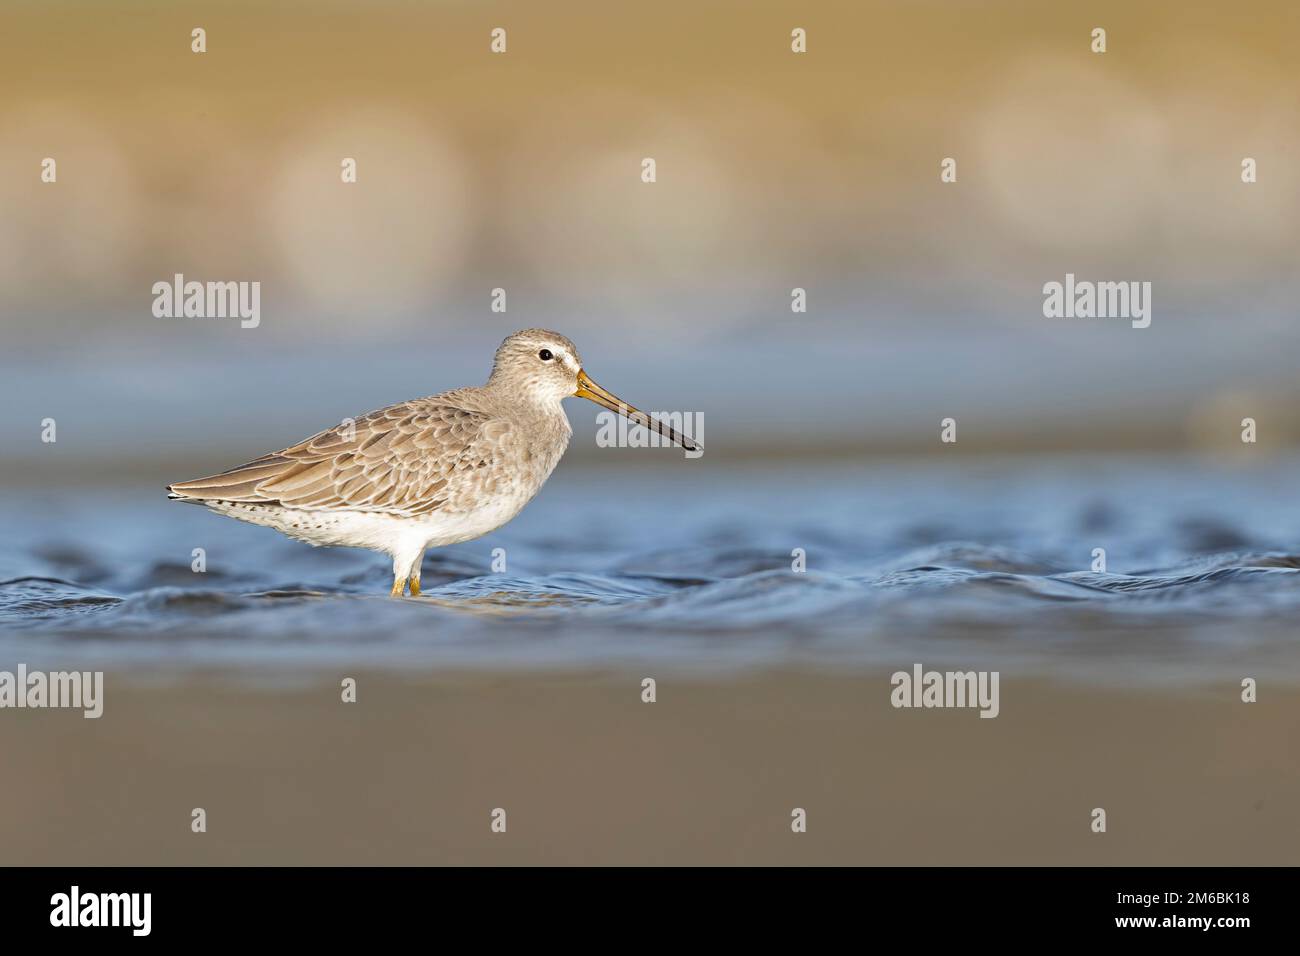 Short-billed dowitcher (Limnodromus griseus) foraging on mud flats in Texas. Stock Photo